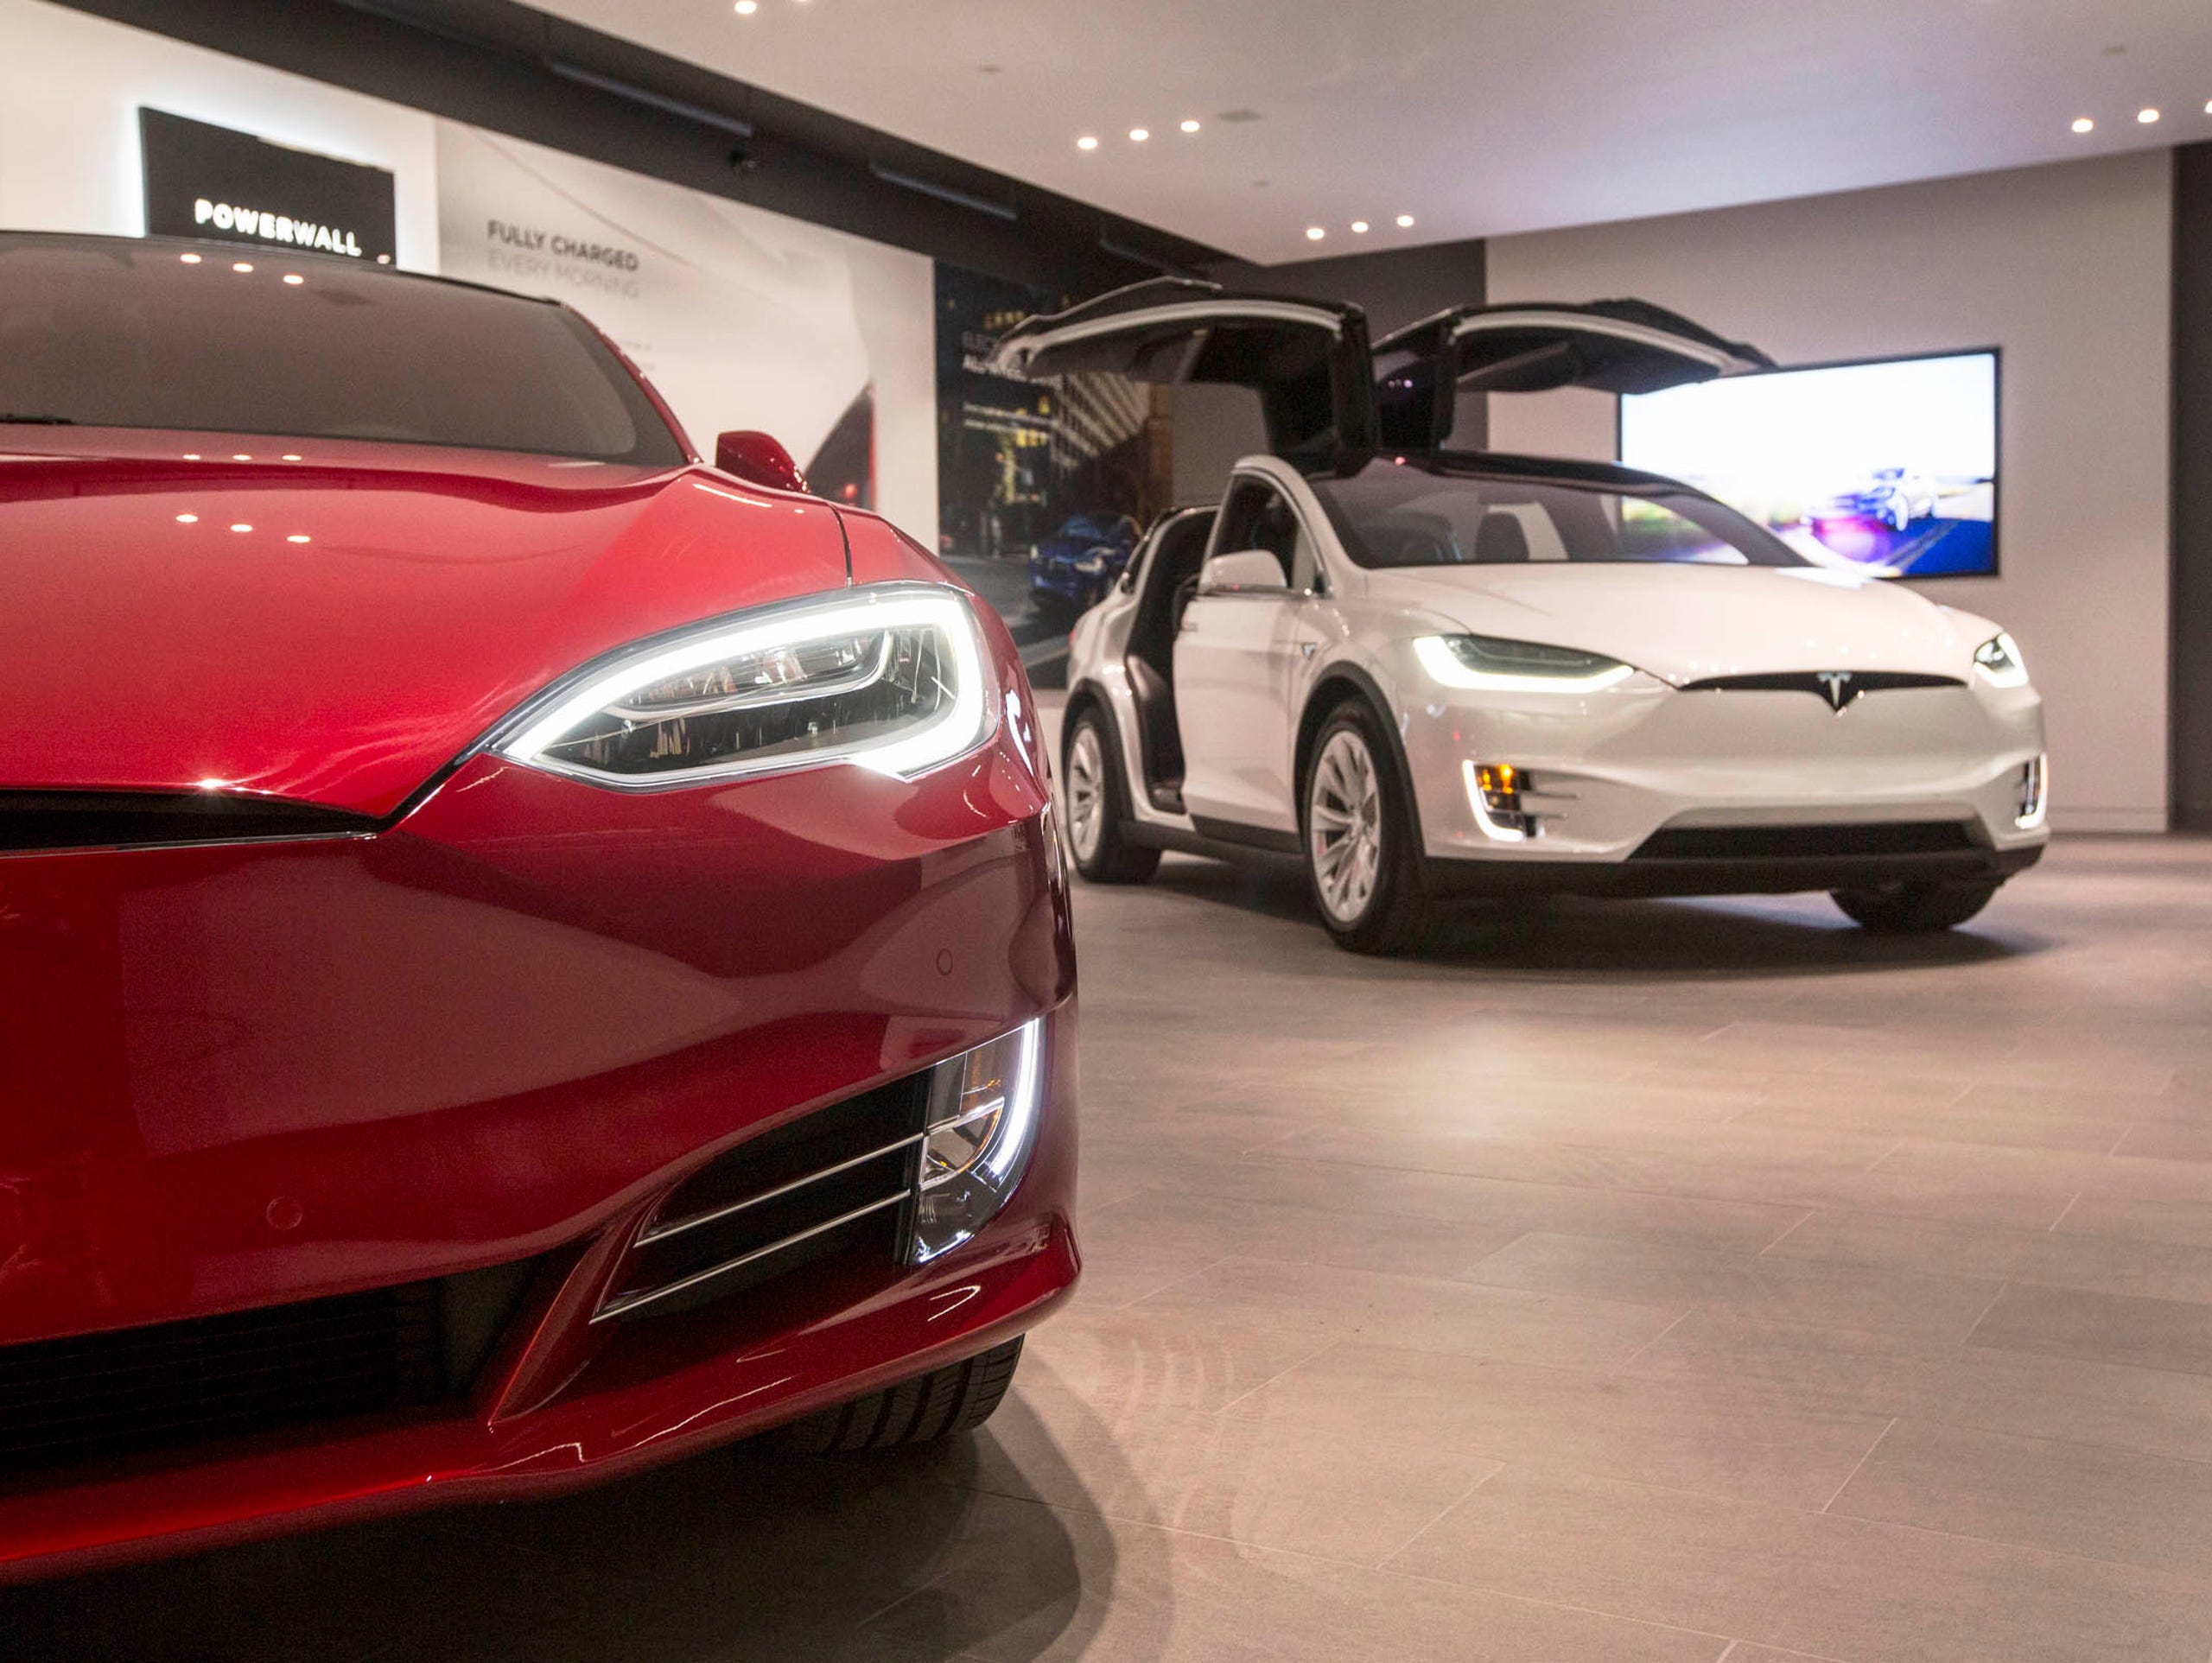 The Tesla Model S, left, and the Model X are seen in the showroom at Somerset Collection North in Troy on Thursday, October 26, 2017.